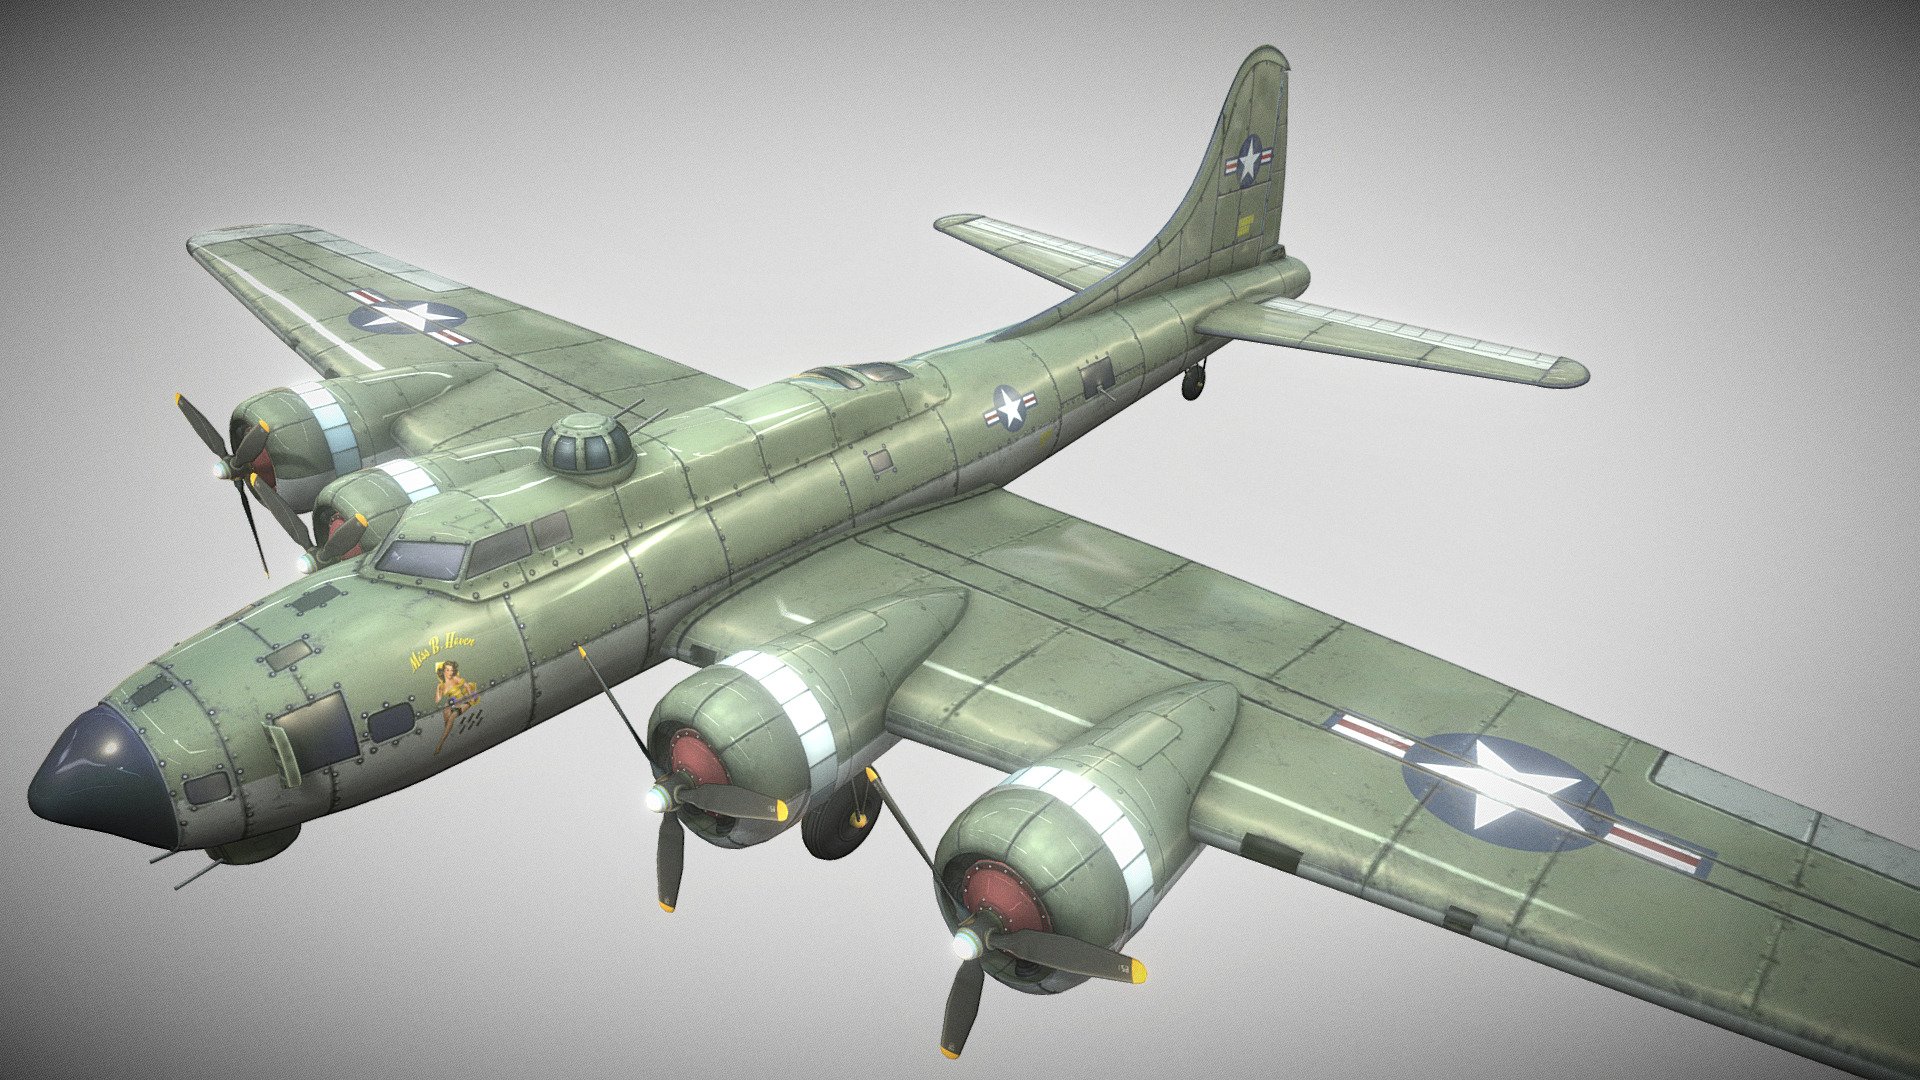 This bomber in hand-painted style is excellent for any kind of historical, survival, WW2, strategy, graphic adventure or VR game.

Details:
The propellers, turrets and wheels are separate/parented objects so they can be animated easily.

The model includes a 4096 x 4096 hand-painted texture.

Feel free to contact me for info or suggestions 3d model